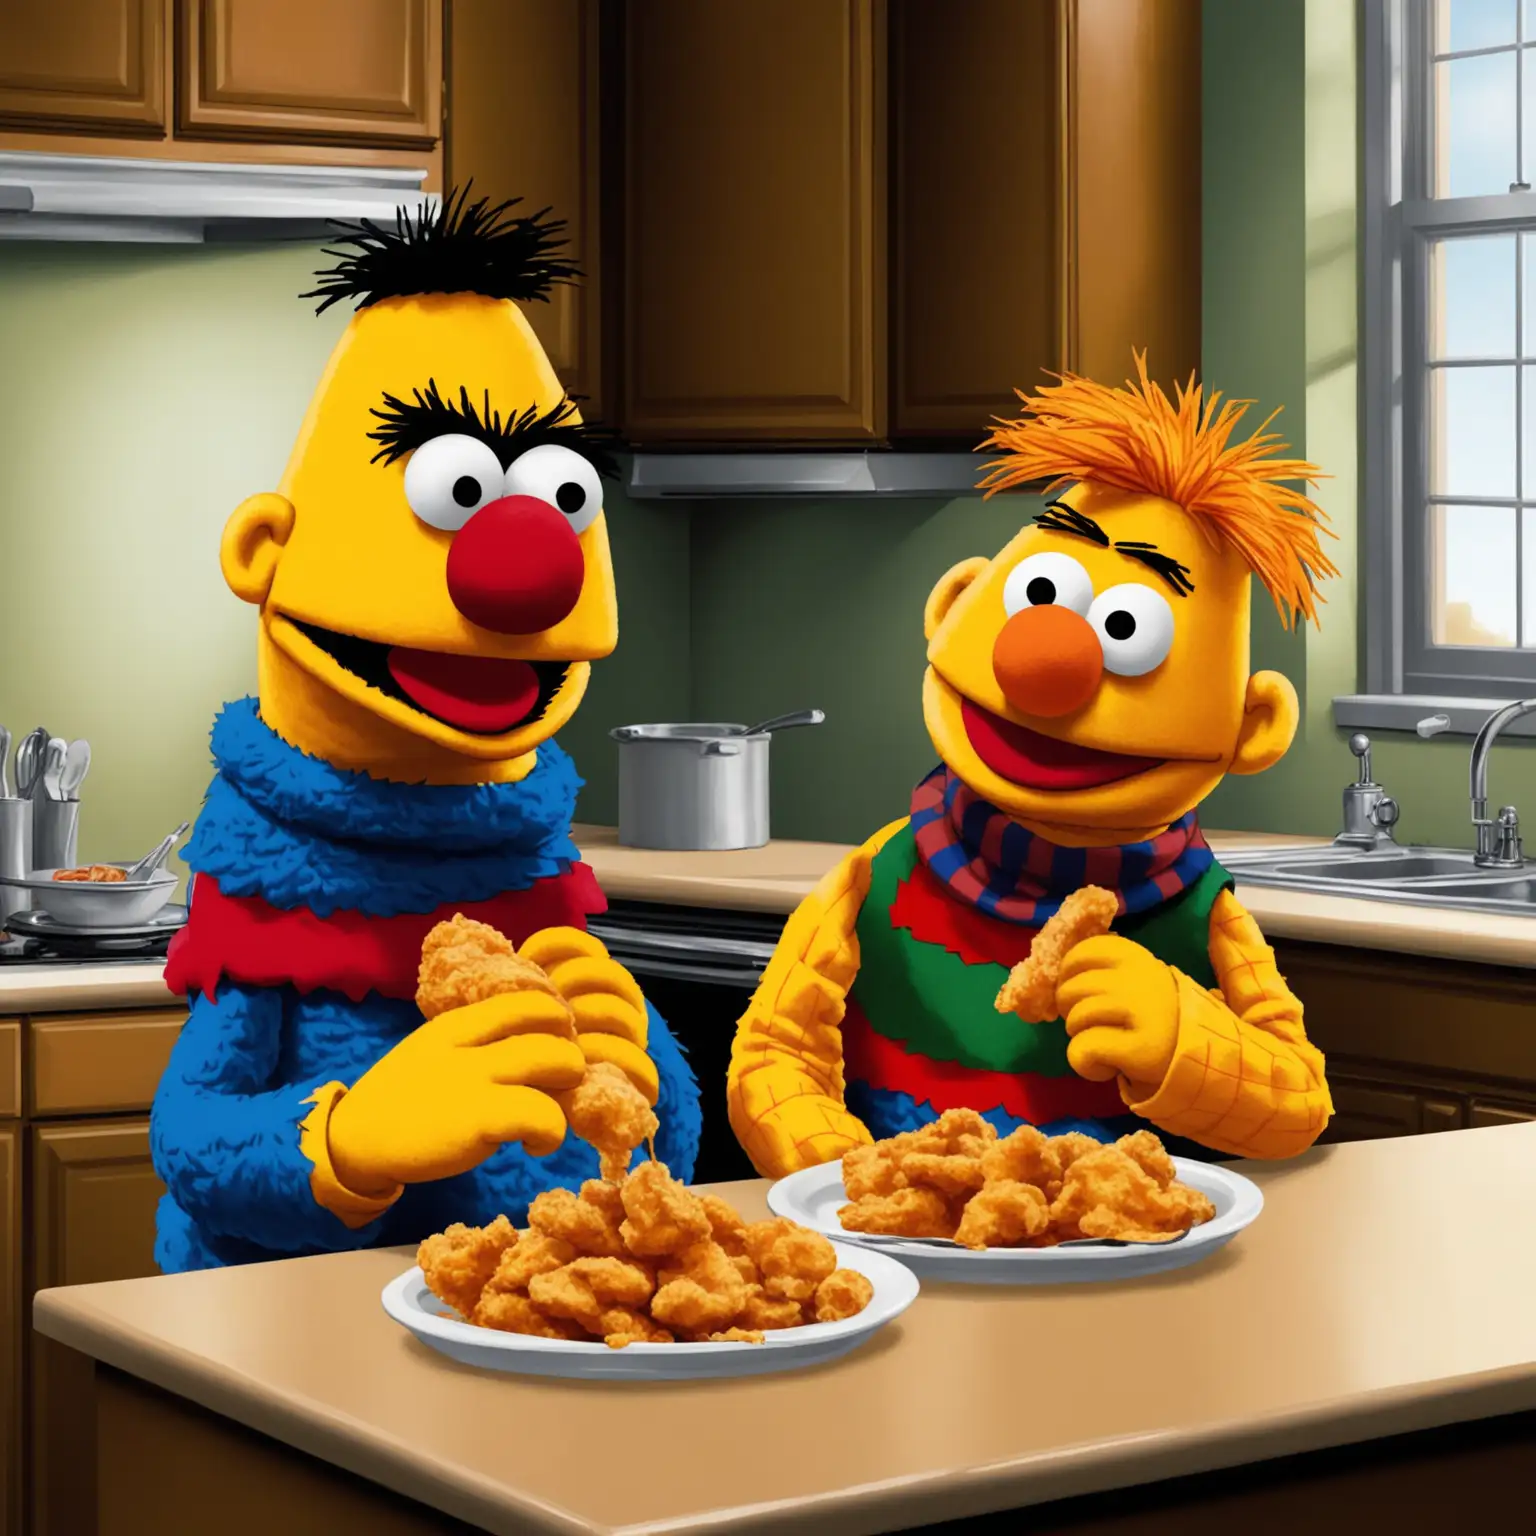 Bert and Ernie eating fried food for breakfast in the kitchen